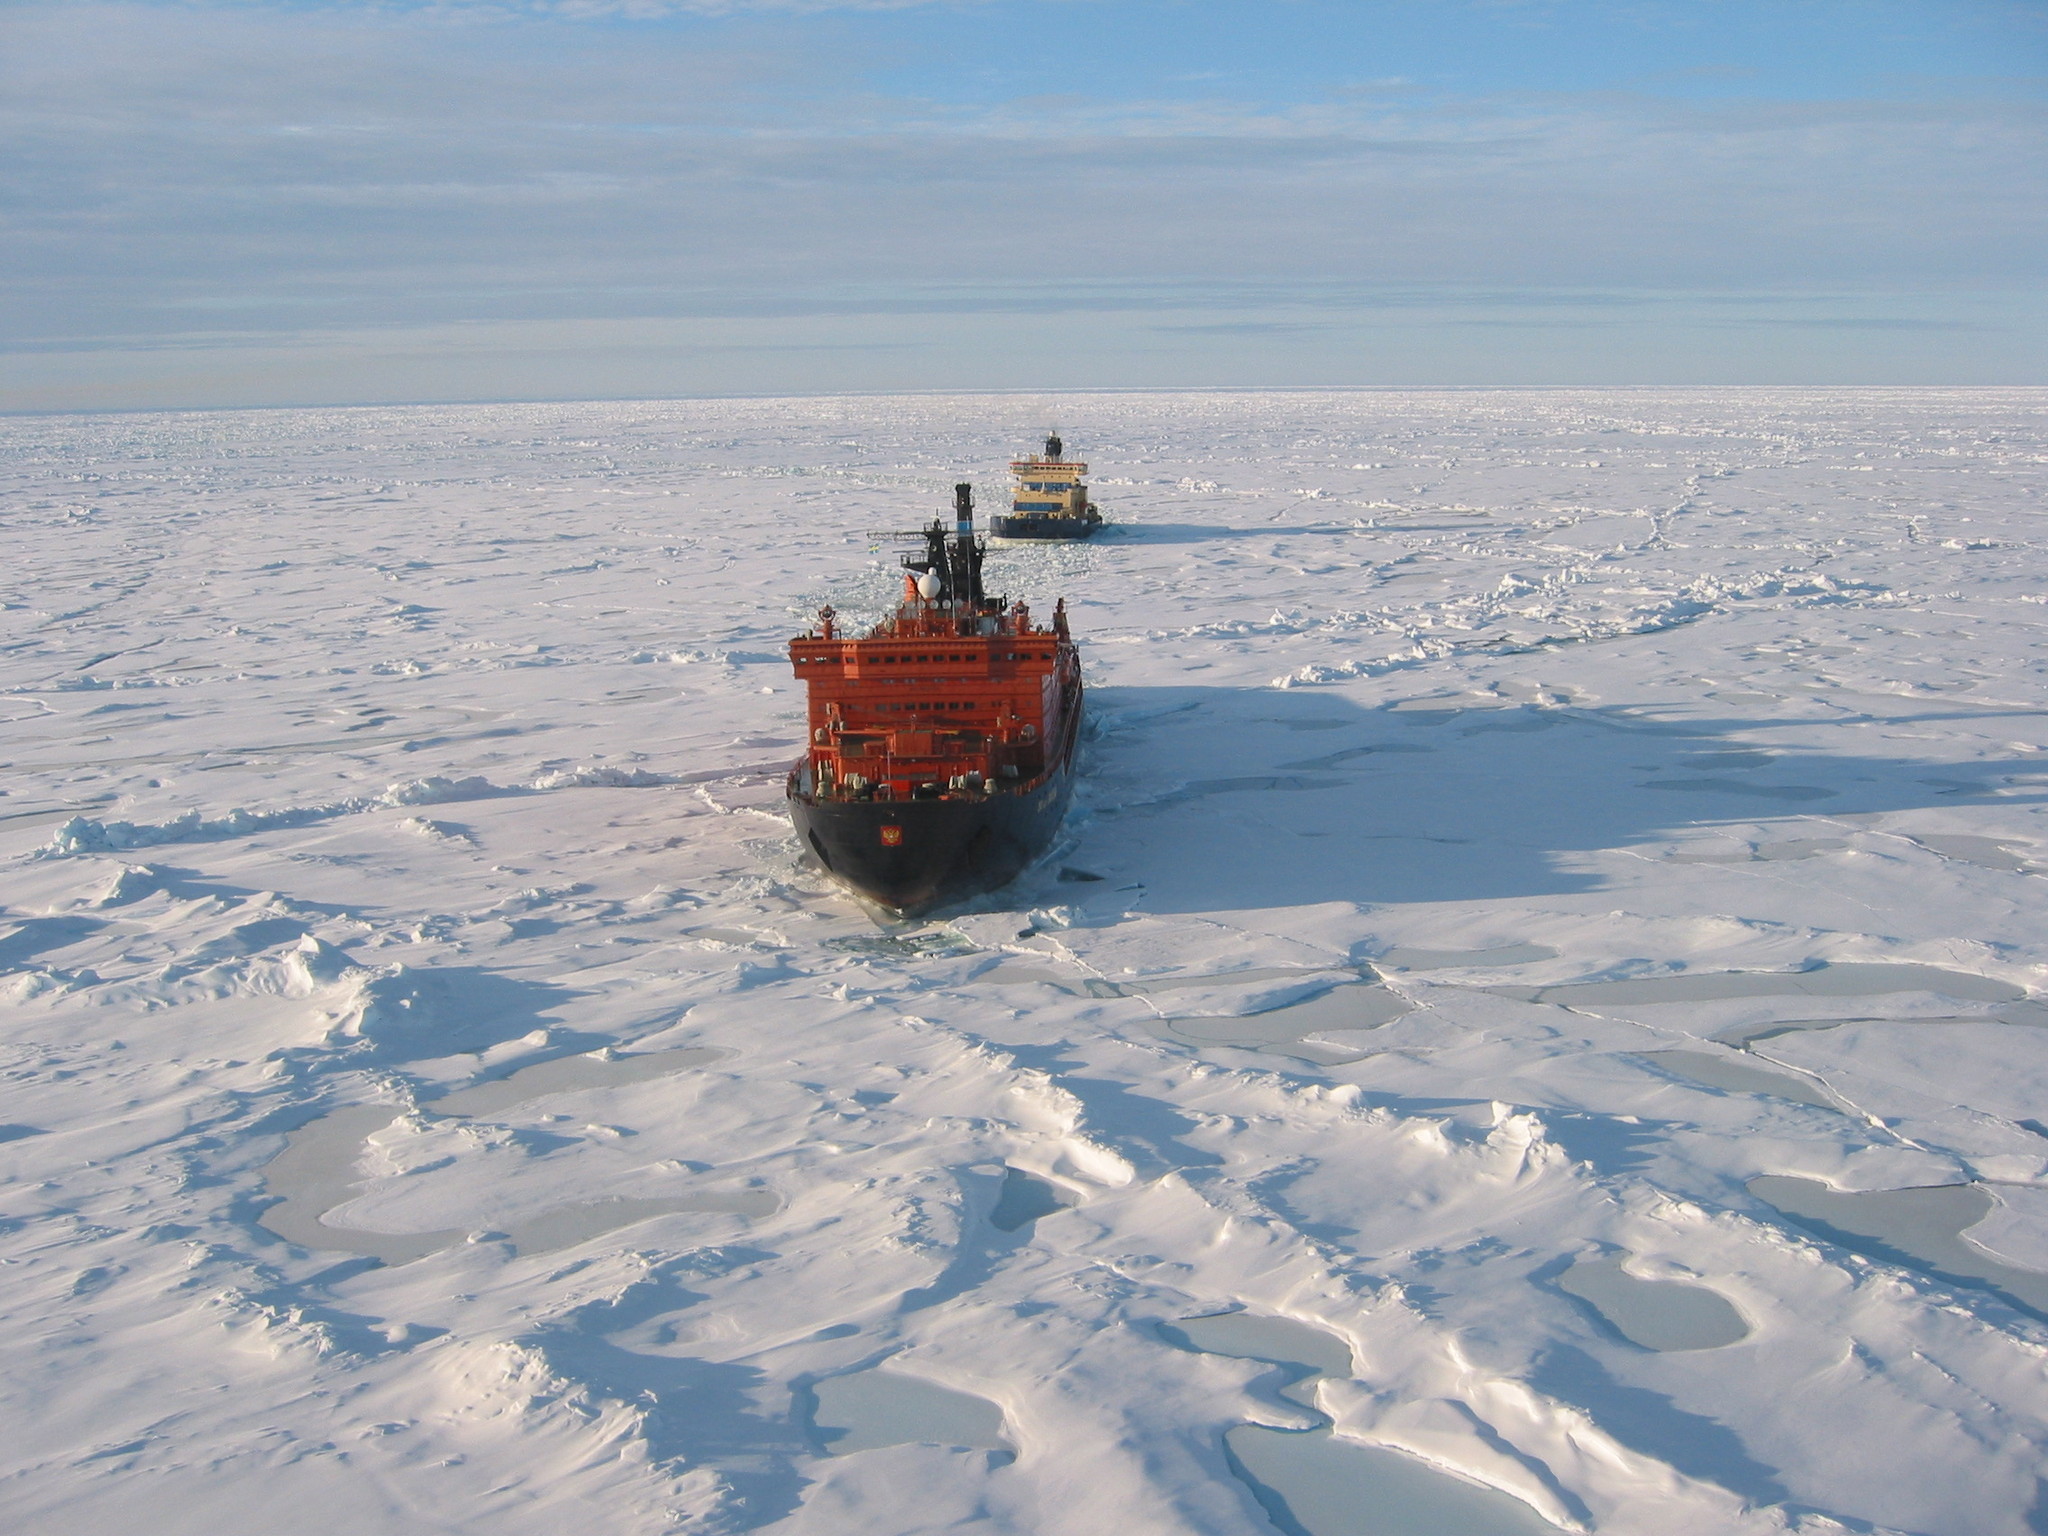 A Russian nuclear-powered icebreaker intended to clear path for trade ships following the Northern Sea Route through the Arctic.